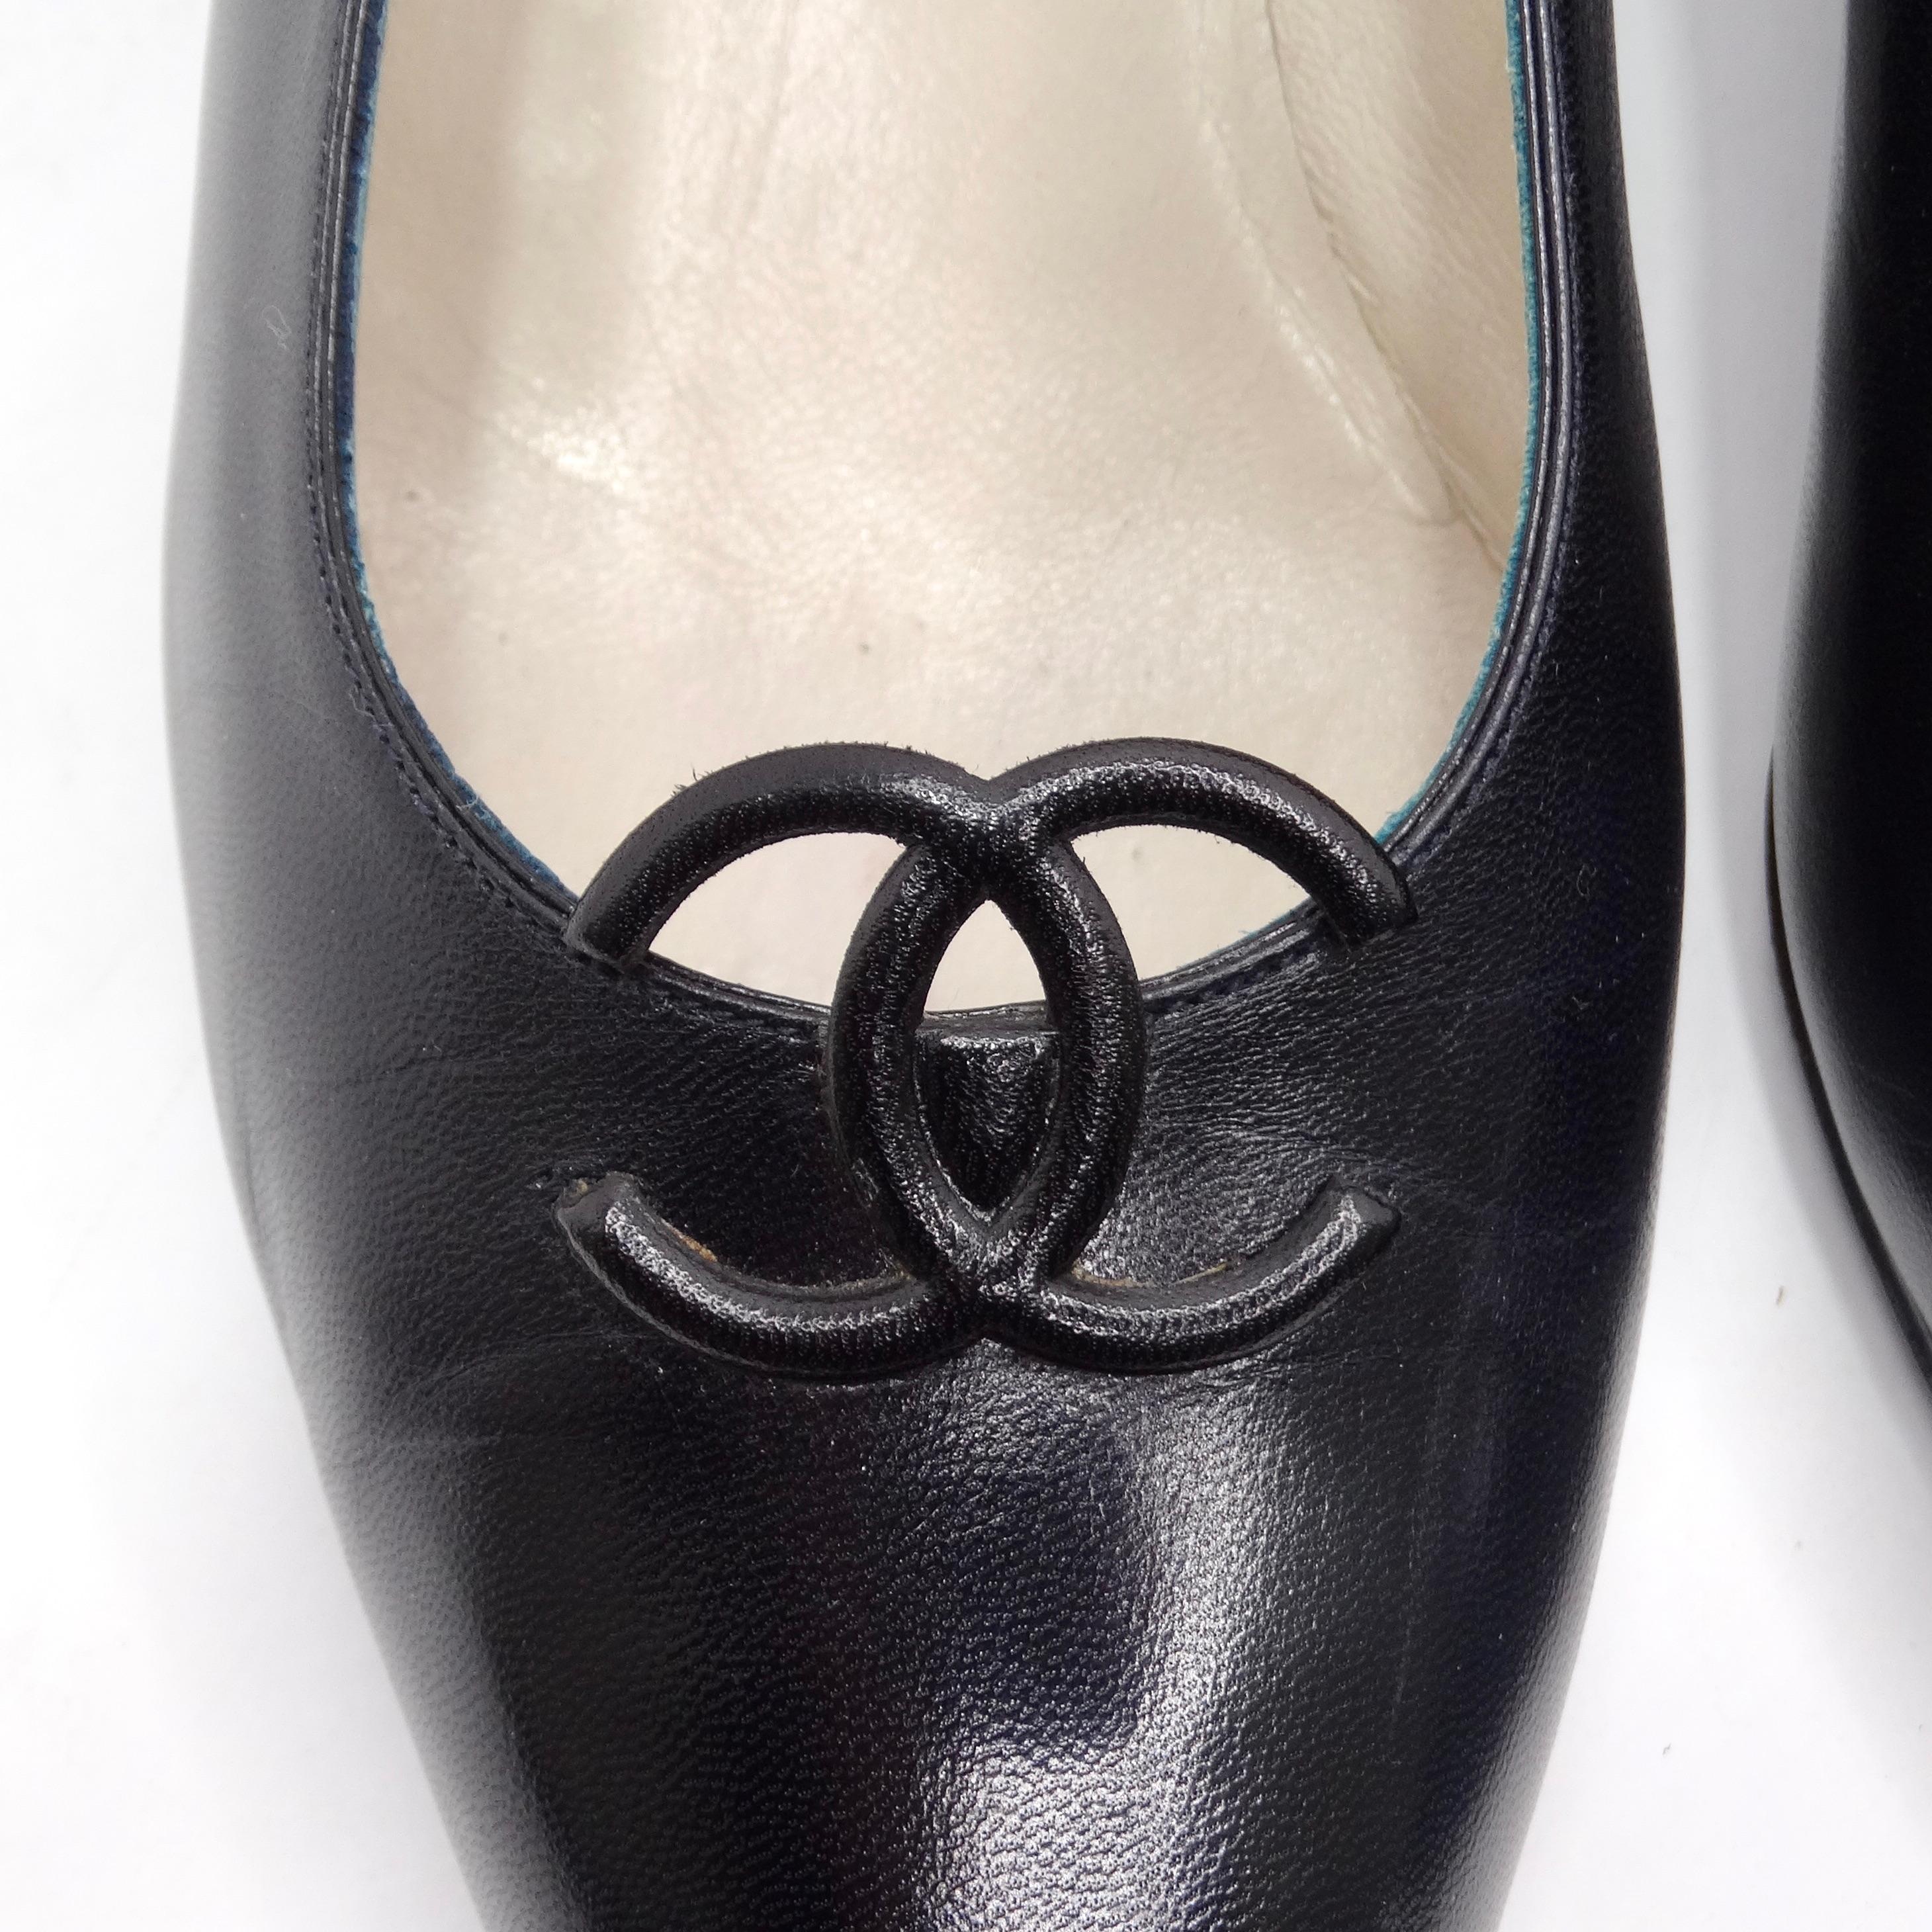 Introducing the Chanel 1980s CC Black Leather Kitten Heels – an embodiment of timeless elegance and understated luxury. These classic pointed kitten heels in smooth black leather are a versatile and chic addition to any wardrobe, perfect for daily